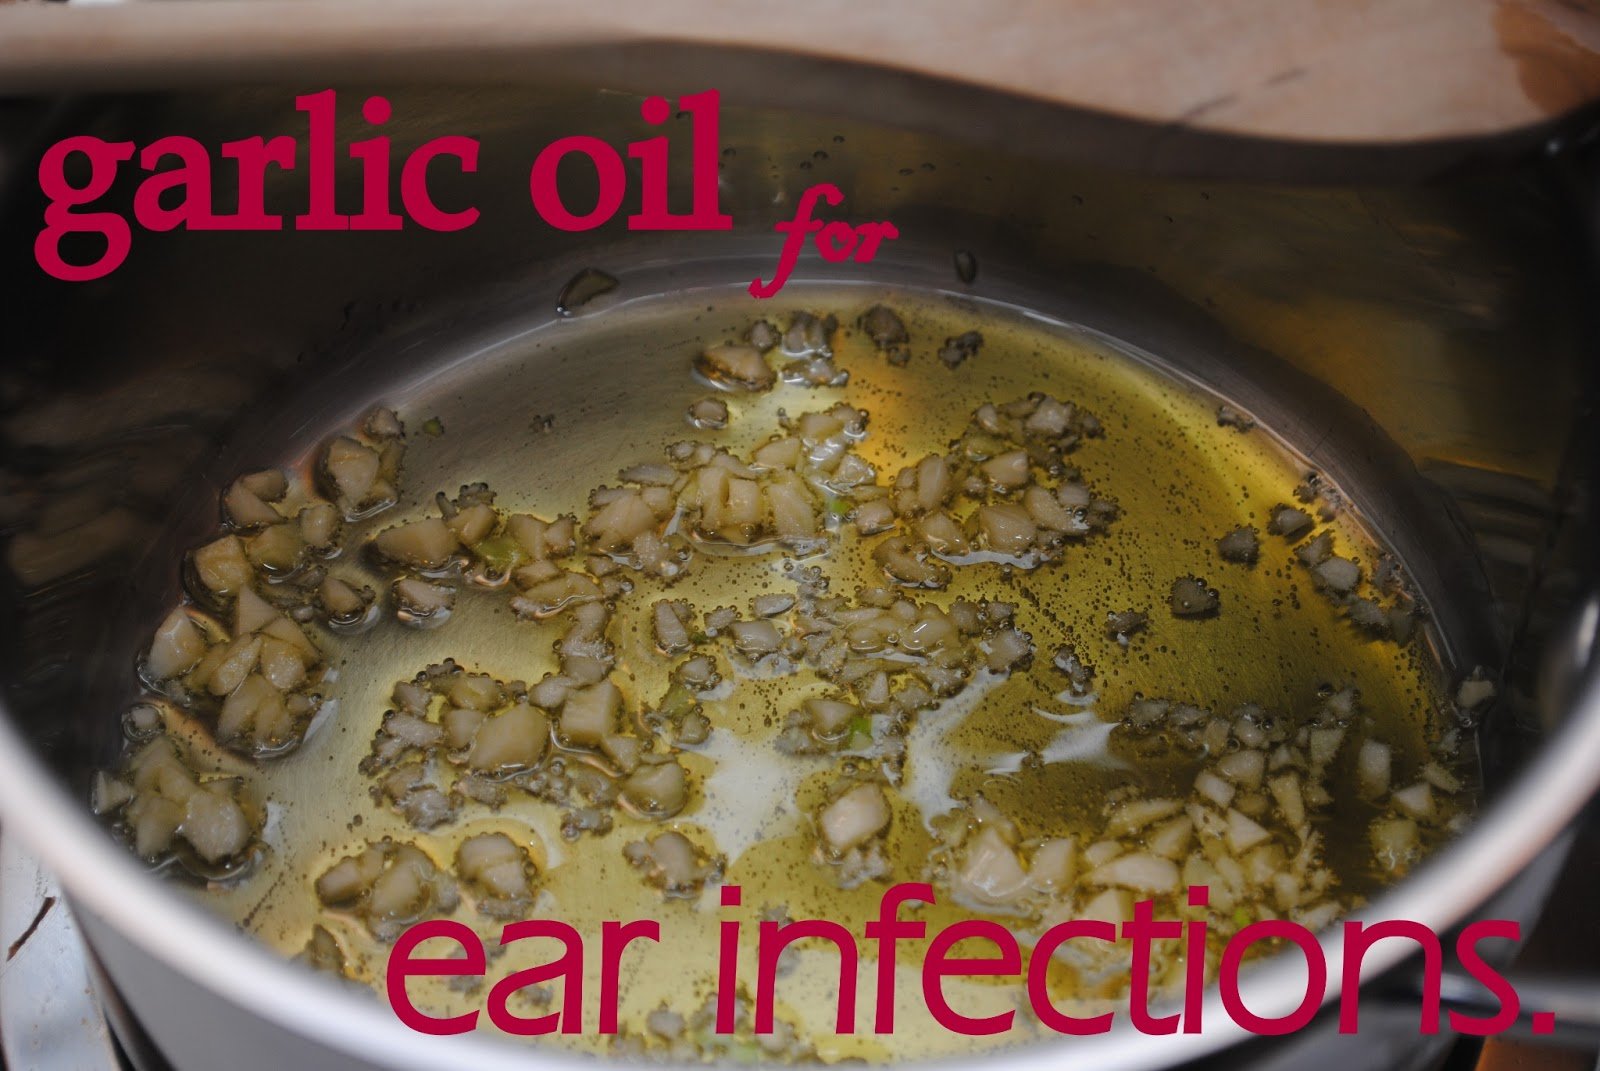 i thought of it second.: garlic oil for ear infections.